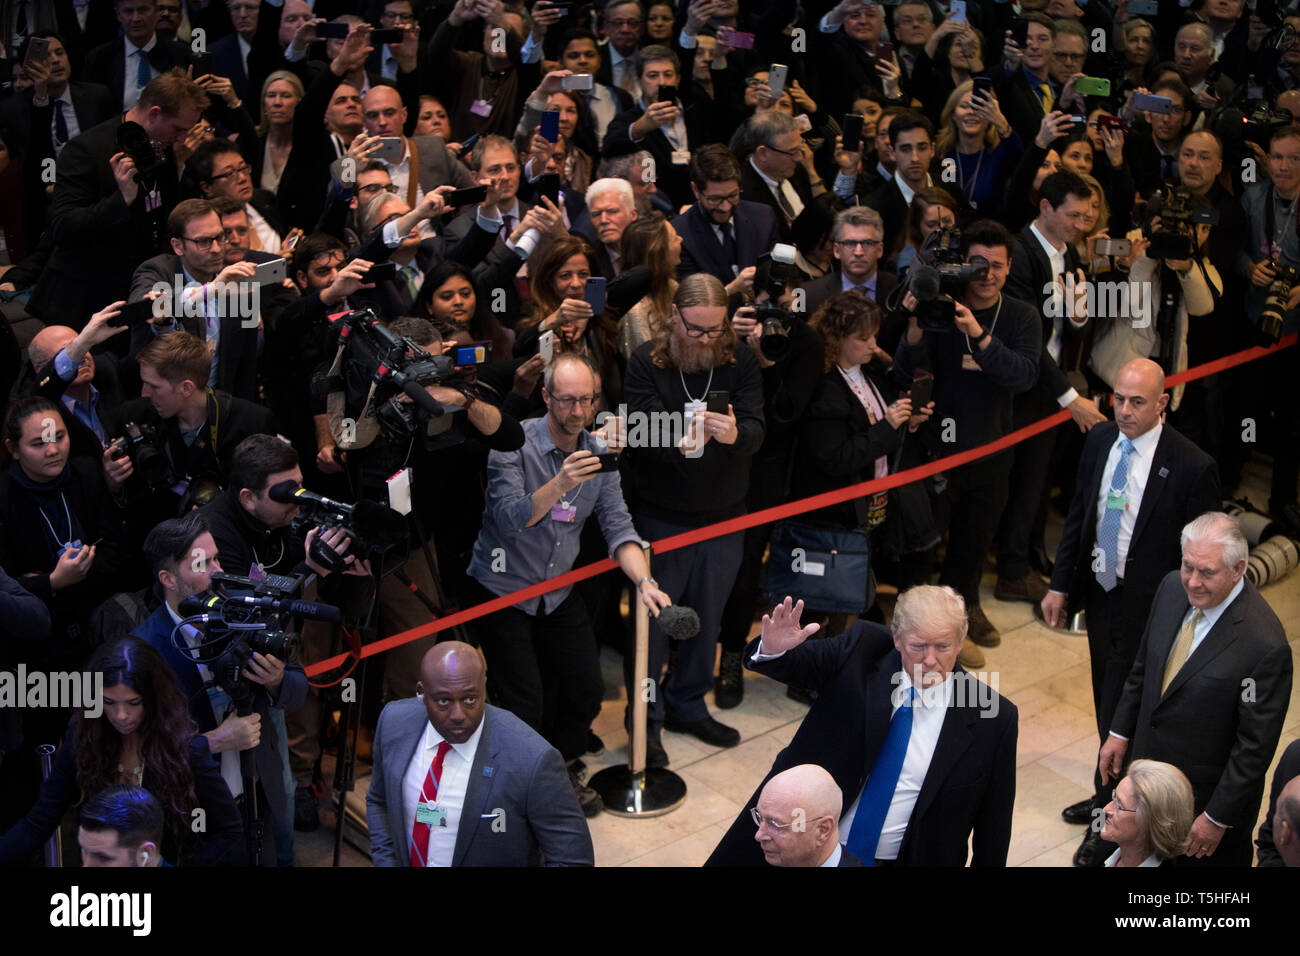 Massive crowd inside the Congress Center in Davos as the US President Donald J. Trump arrives to the World Economic Forum. former Secretary of State Rex Tillerson walks behind him. Stock Photo